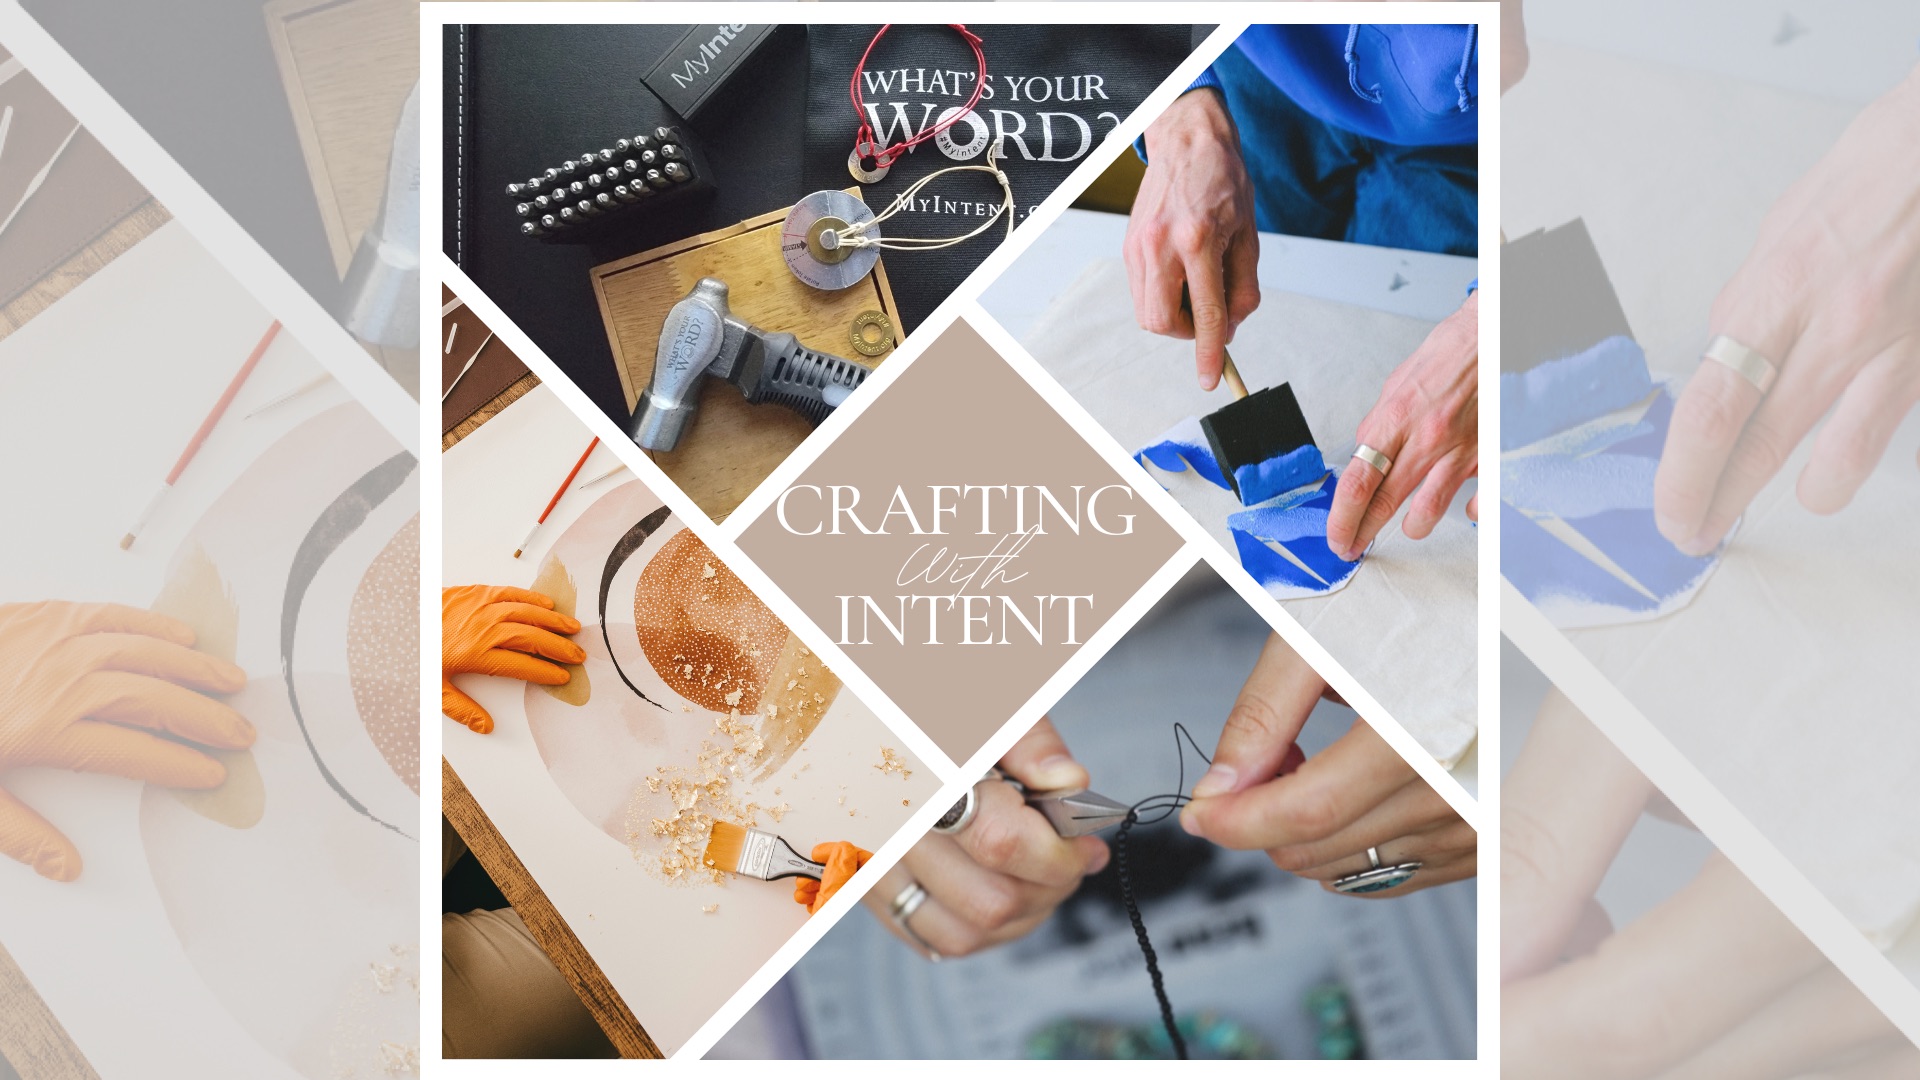 Crafting with Intent